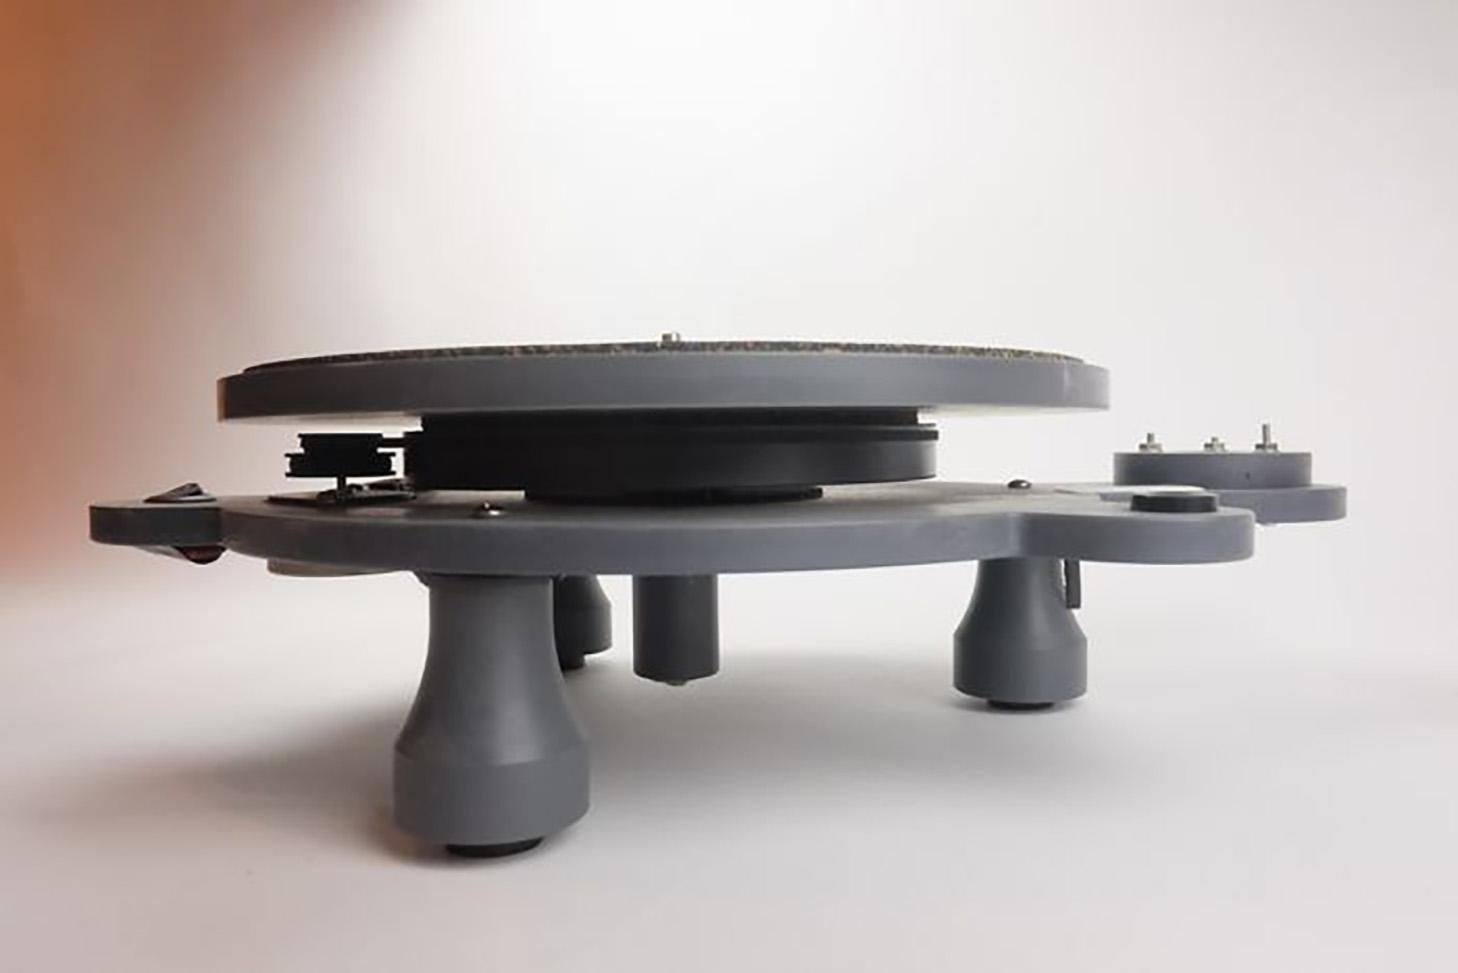 George merrill turntable turntable Polytable
The PolyTable is designed and manufactured by George Merrill in the United States.
The PolyTable is a true high performance vinyl turntable.
The look is striking. 
It outperforms turntables that cost